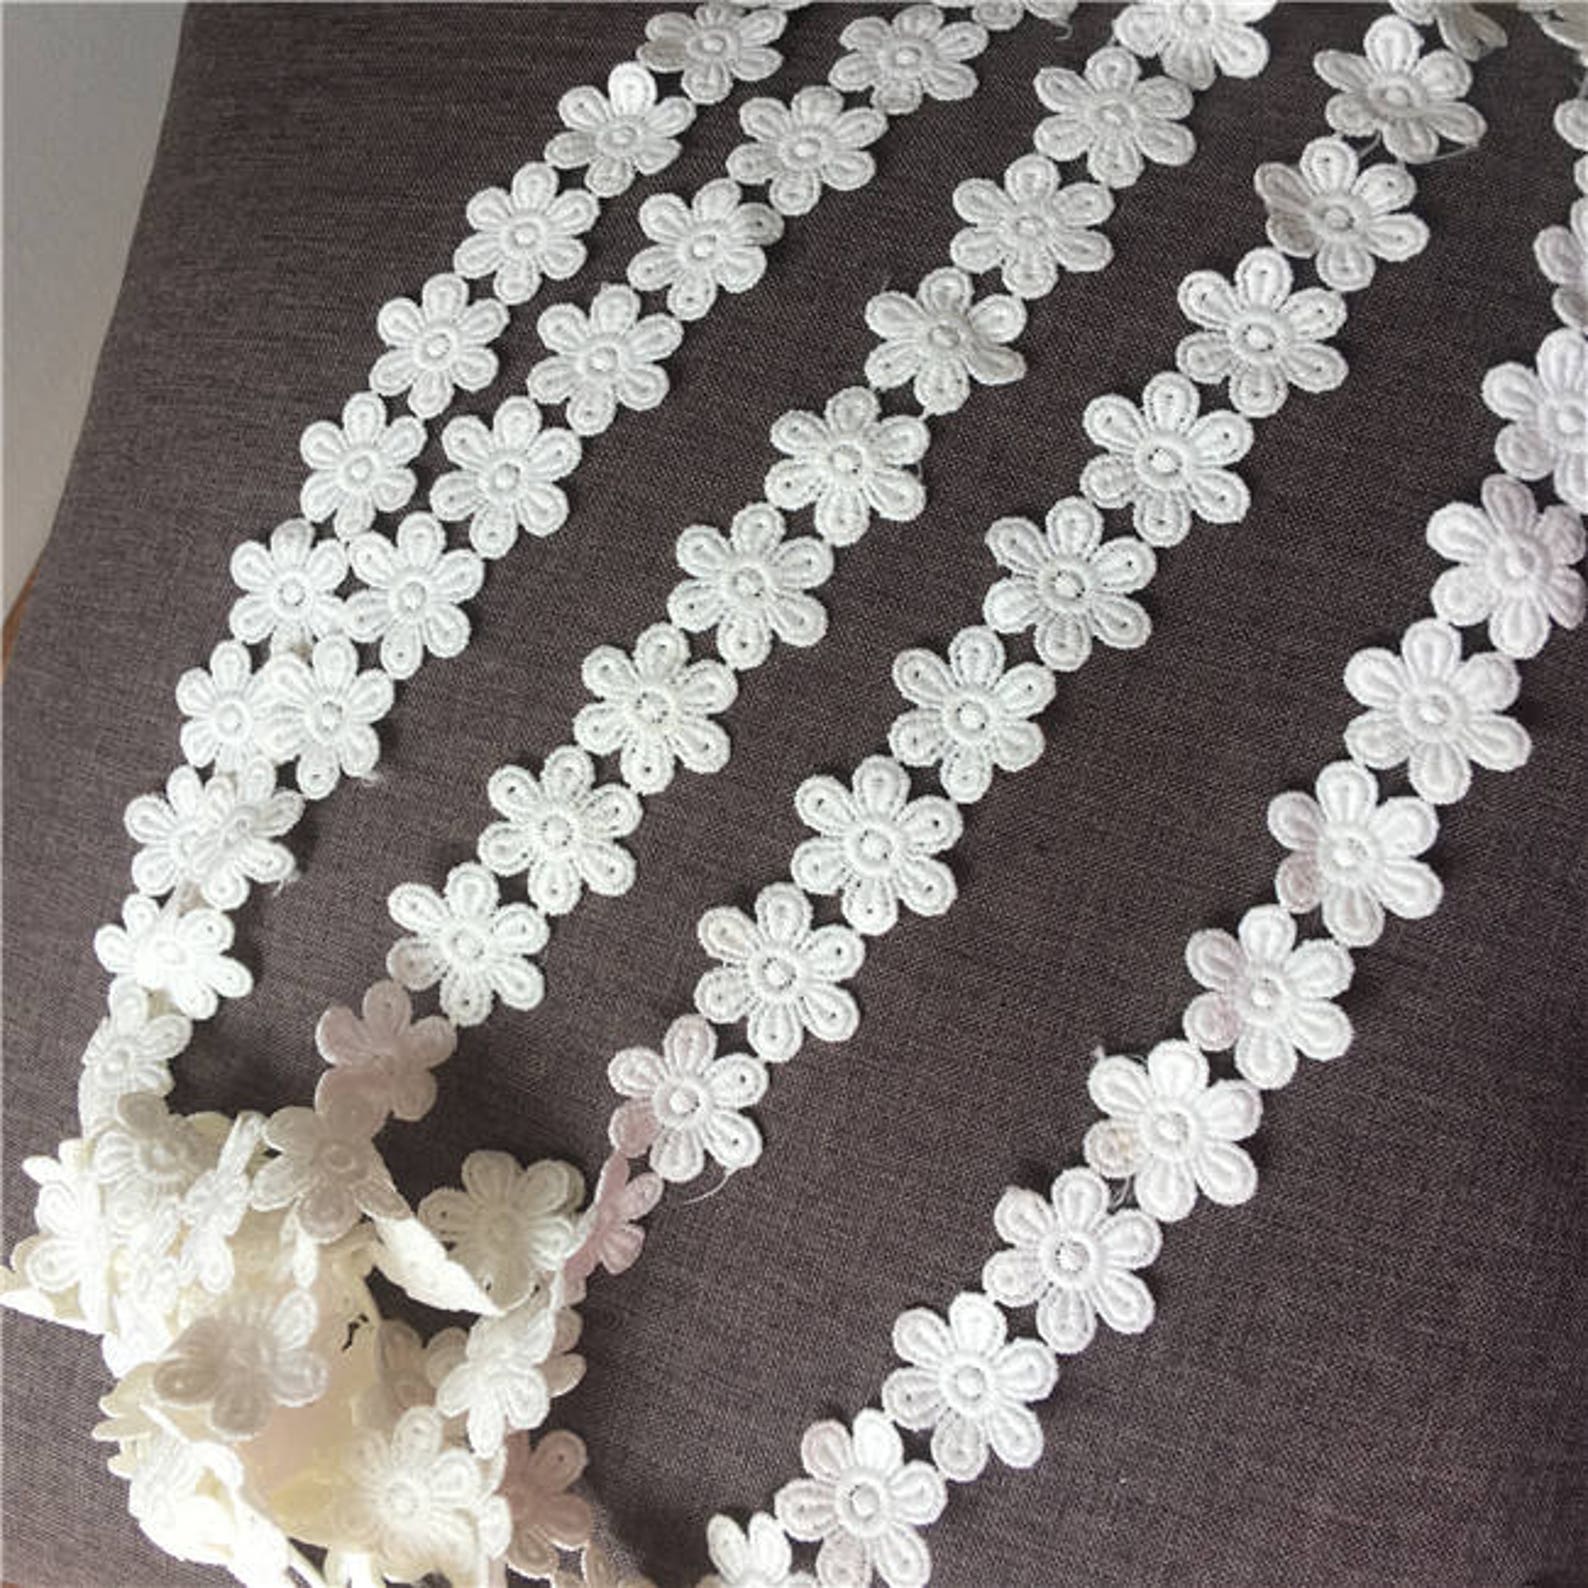 Off White Daisy Lace Trim by the Yard 3 Cm Daisy Lace - Etsy